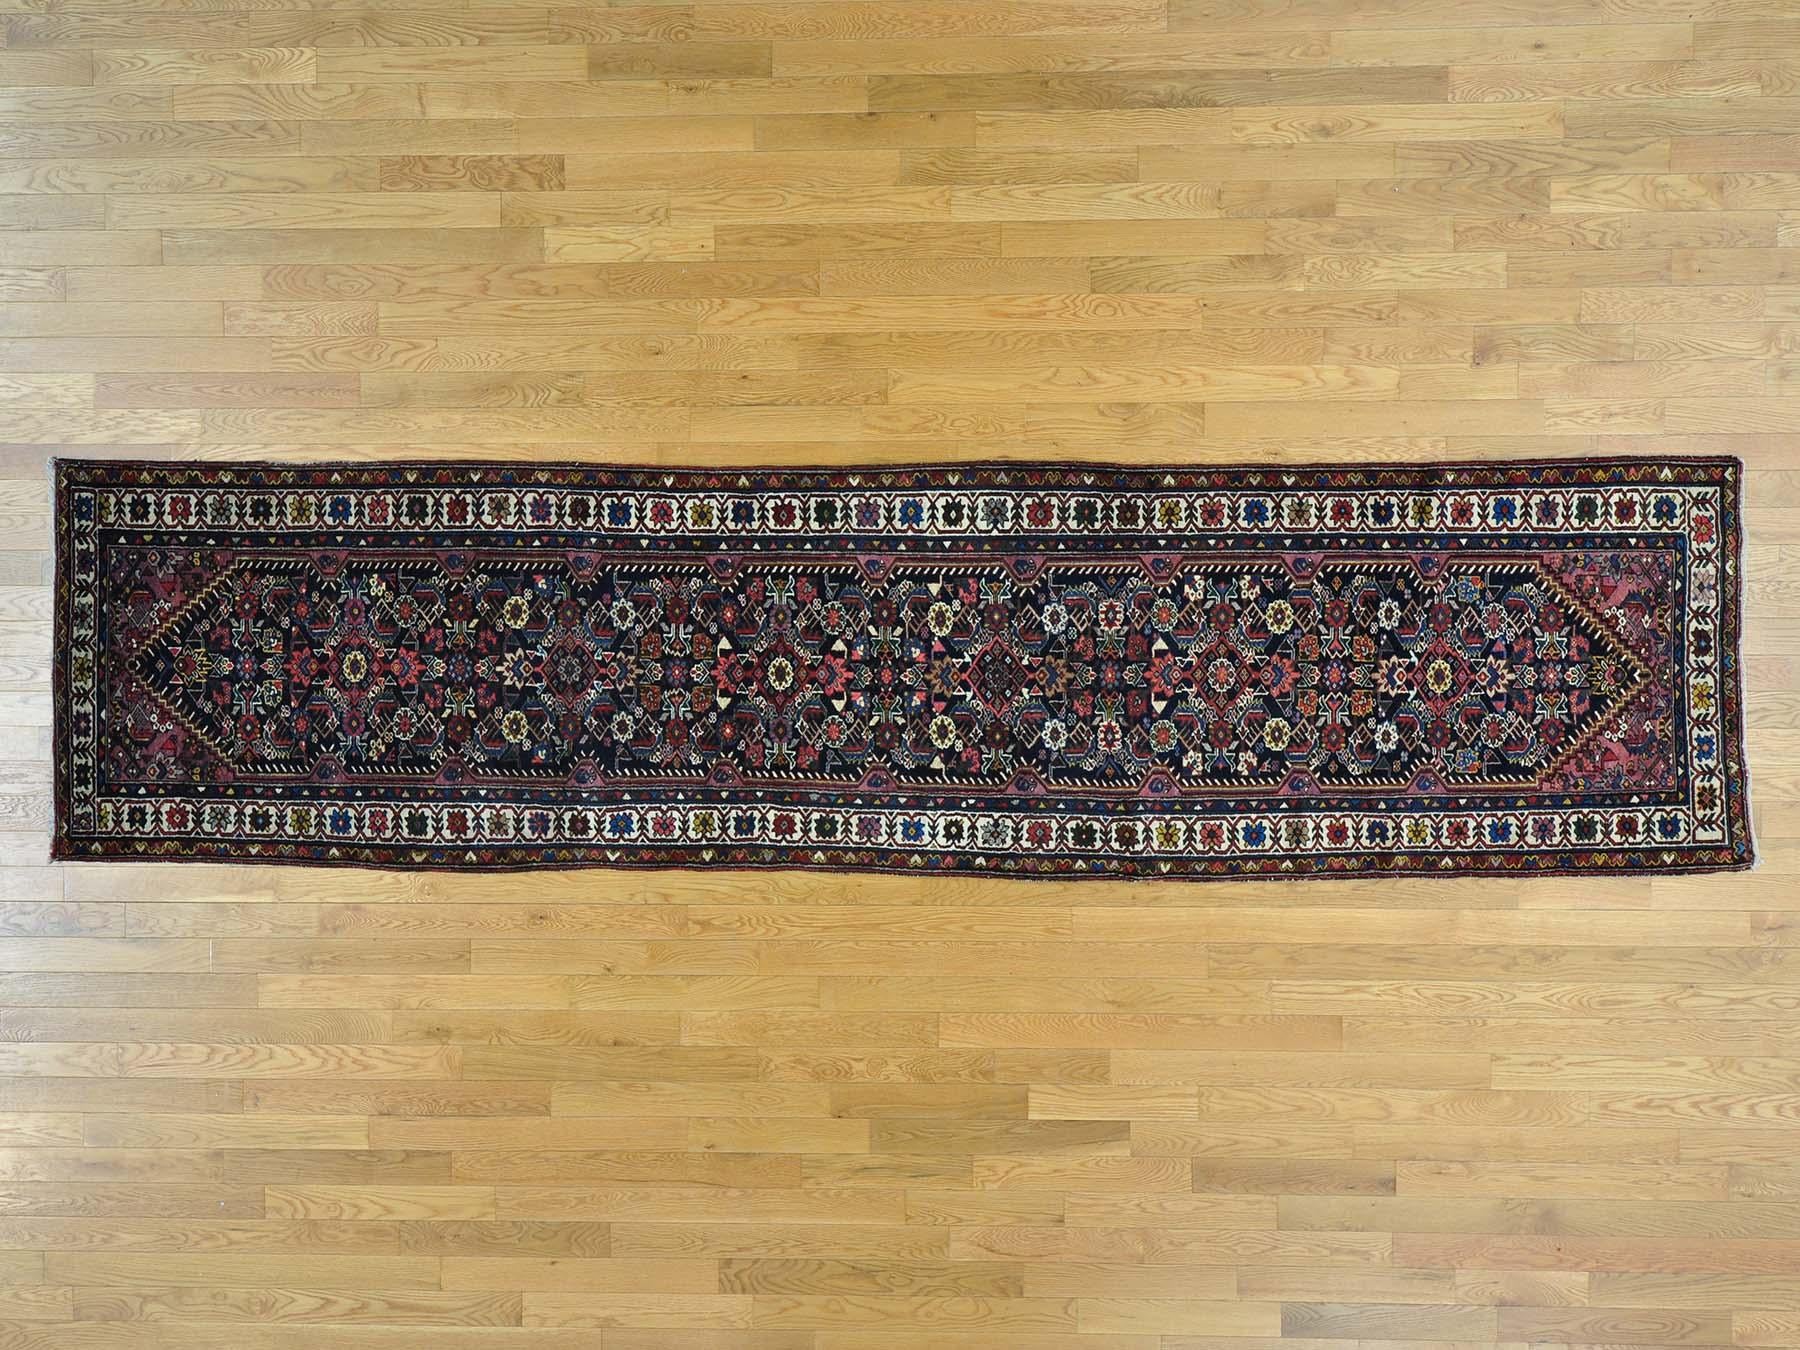 Bring life to your home with this admirable antique carpet. This handcrafted Persian Bakhtiari excellent condition, is an authentic runner size oriental rug. This rare piece has been built for months and months in the centuries old traditional